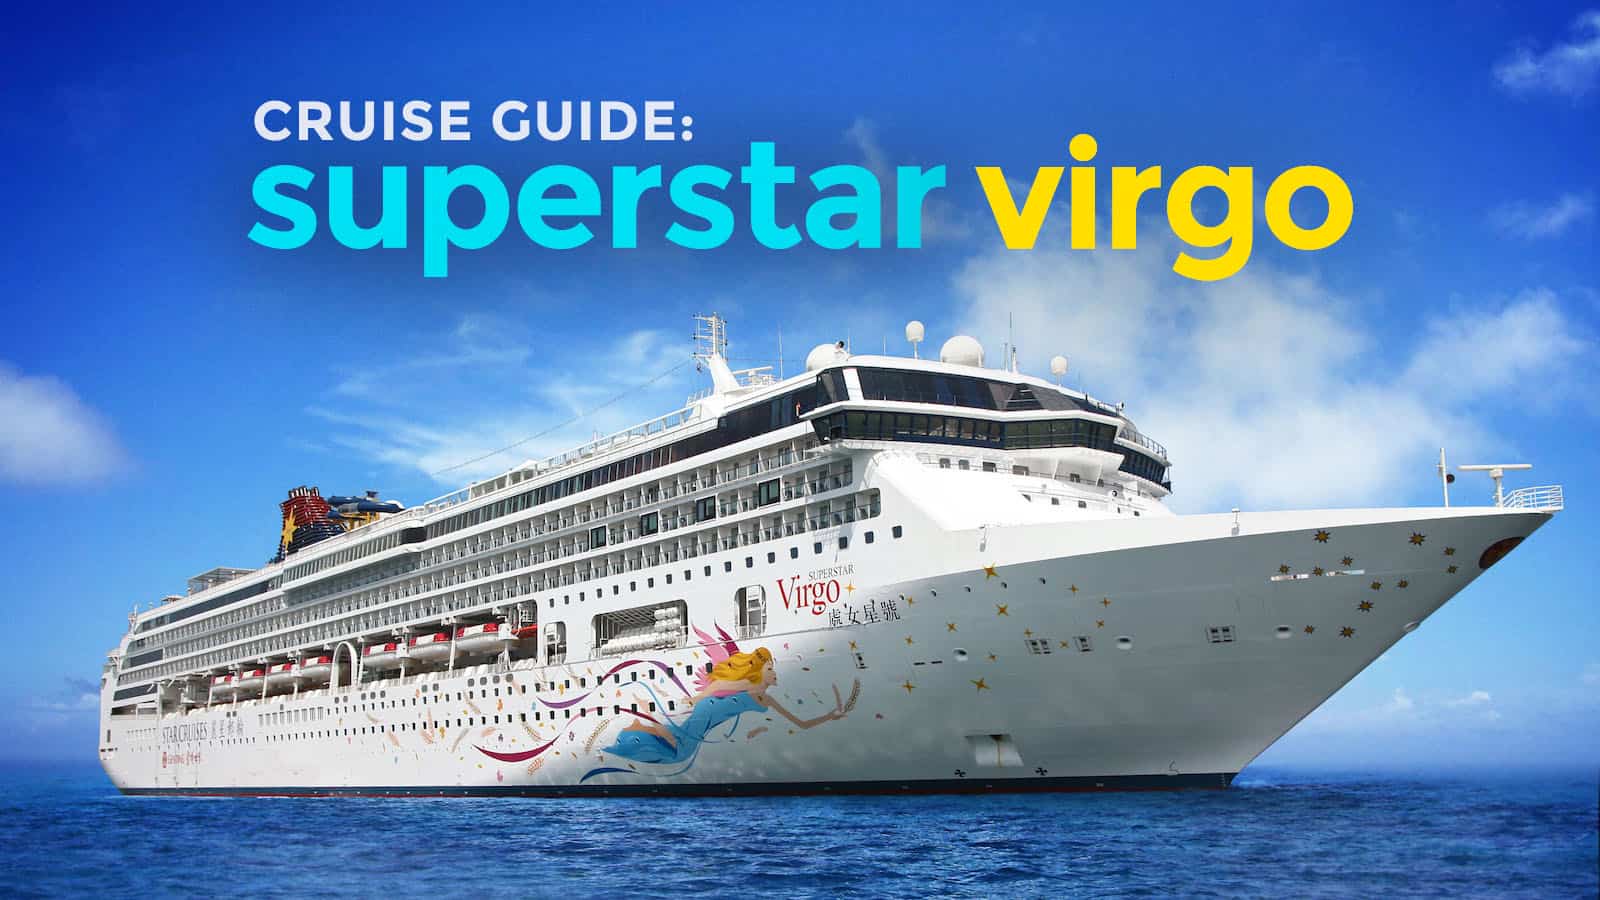 SUPERSTAR VIRGO: Cruise Guide for First-Timers (What to Expect)